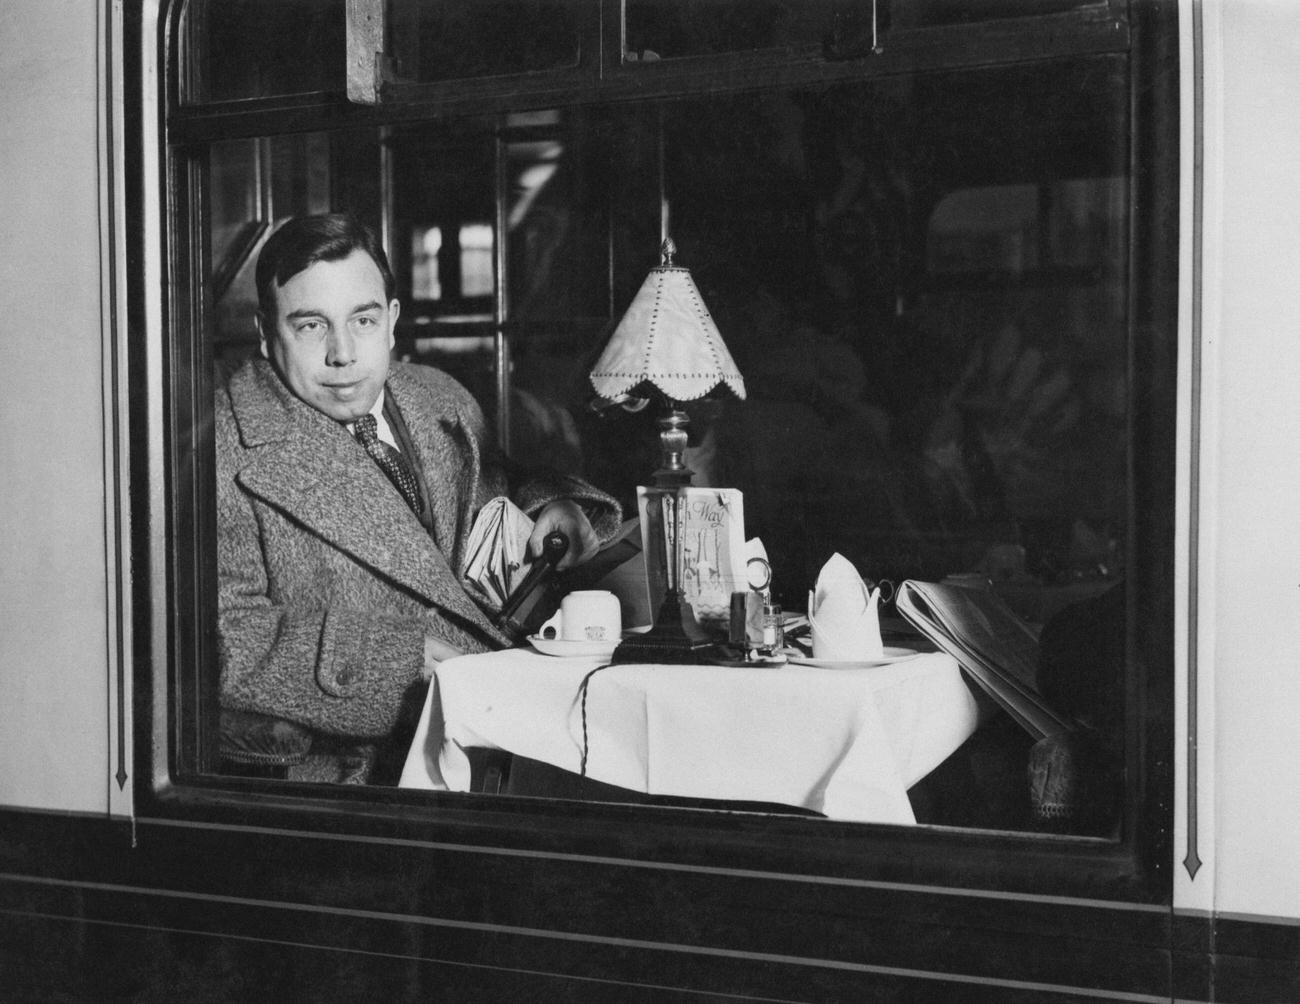 English playwright and novelist, J. B. Priestley at Waterloo railway station, London at the start of a trip to the USA, 11th February 1931.